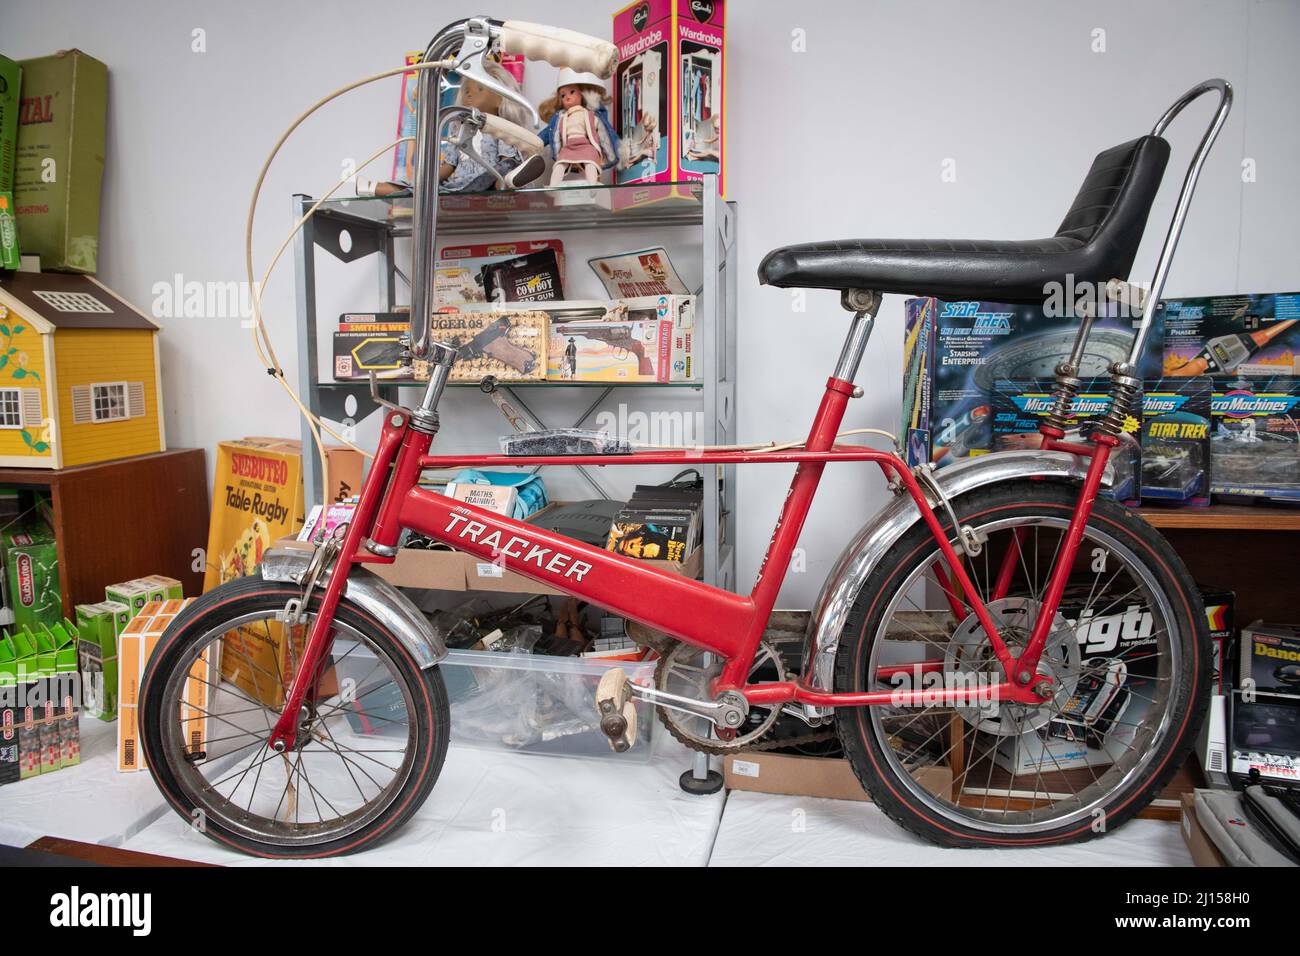 East Bristol Auctions Ltd, Hanham, Bristol, UK. 16th July 2021. Princess Diana's childhood bicycle which she used on her family estate during the 1970 Stock Photo